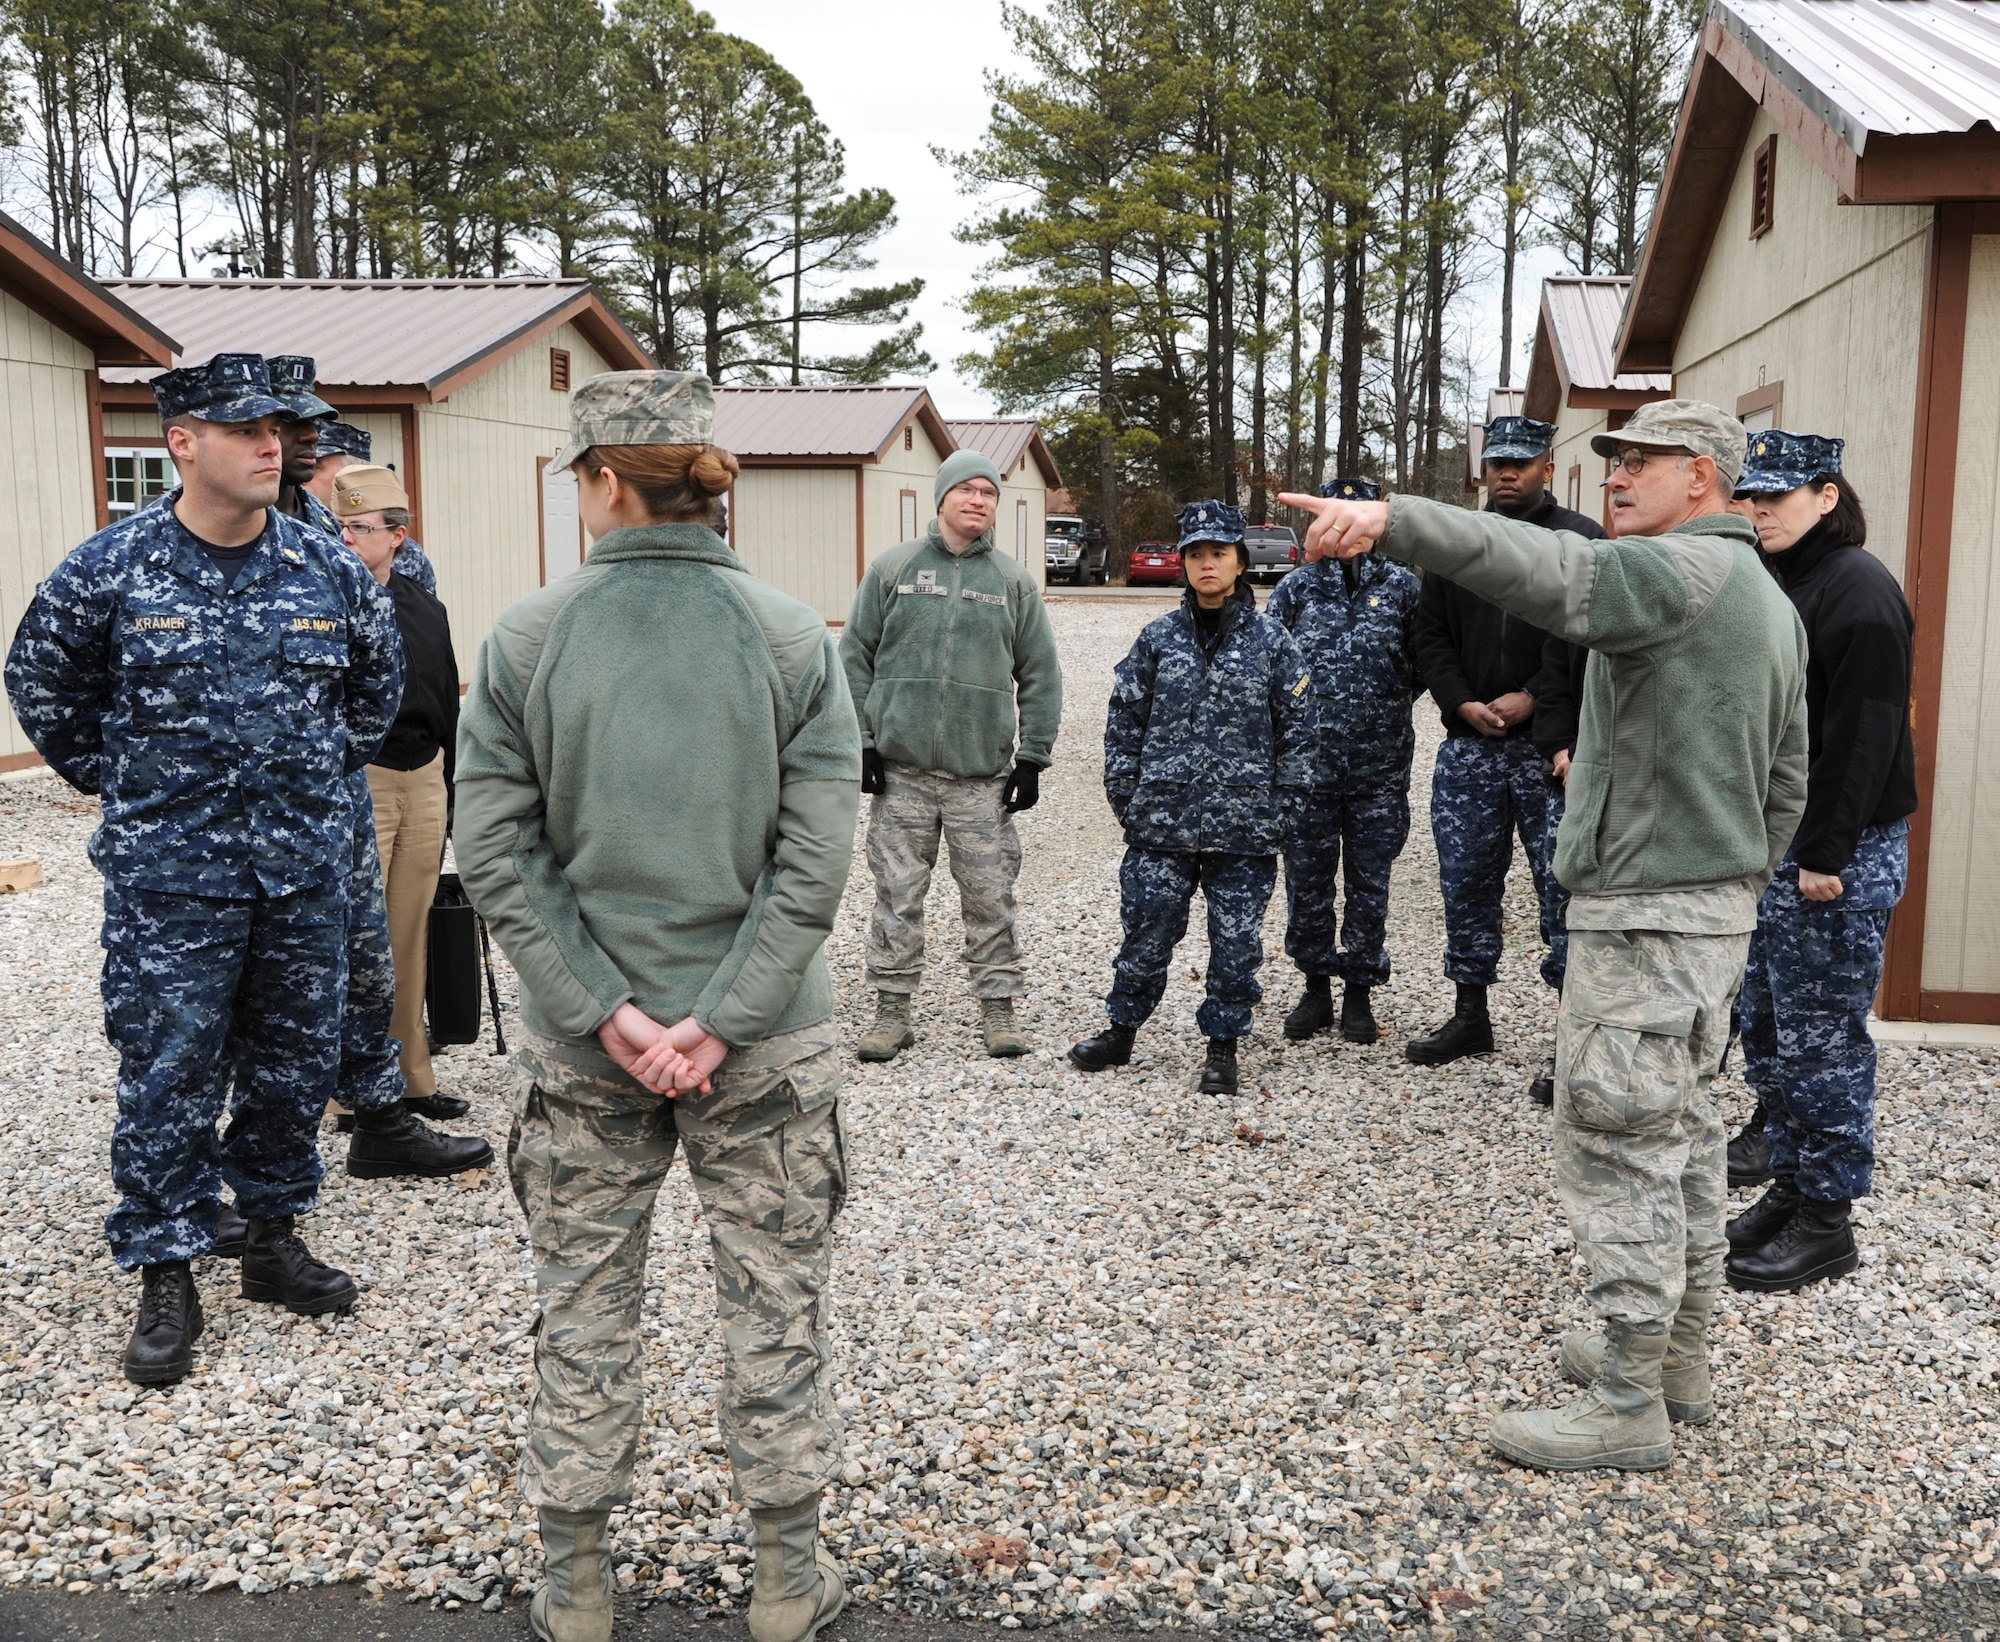 Navy personnel from the Naval Medical Center Portsmouth, Va., visit the Expeditionary Medical Support System exercise location 17 February, 2014. The visit was to see if the new tent systems and equipment can be incorporated into naval expeditionary operations. (U.S. Air Force photo by Staff Sgt. Steve Stanley/Released)